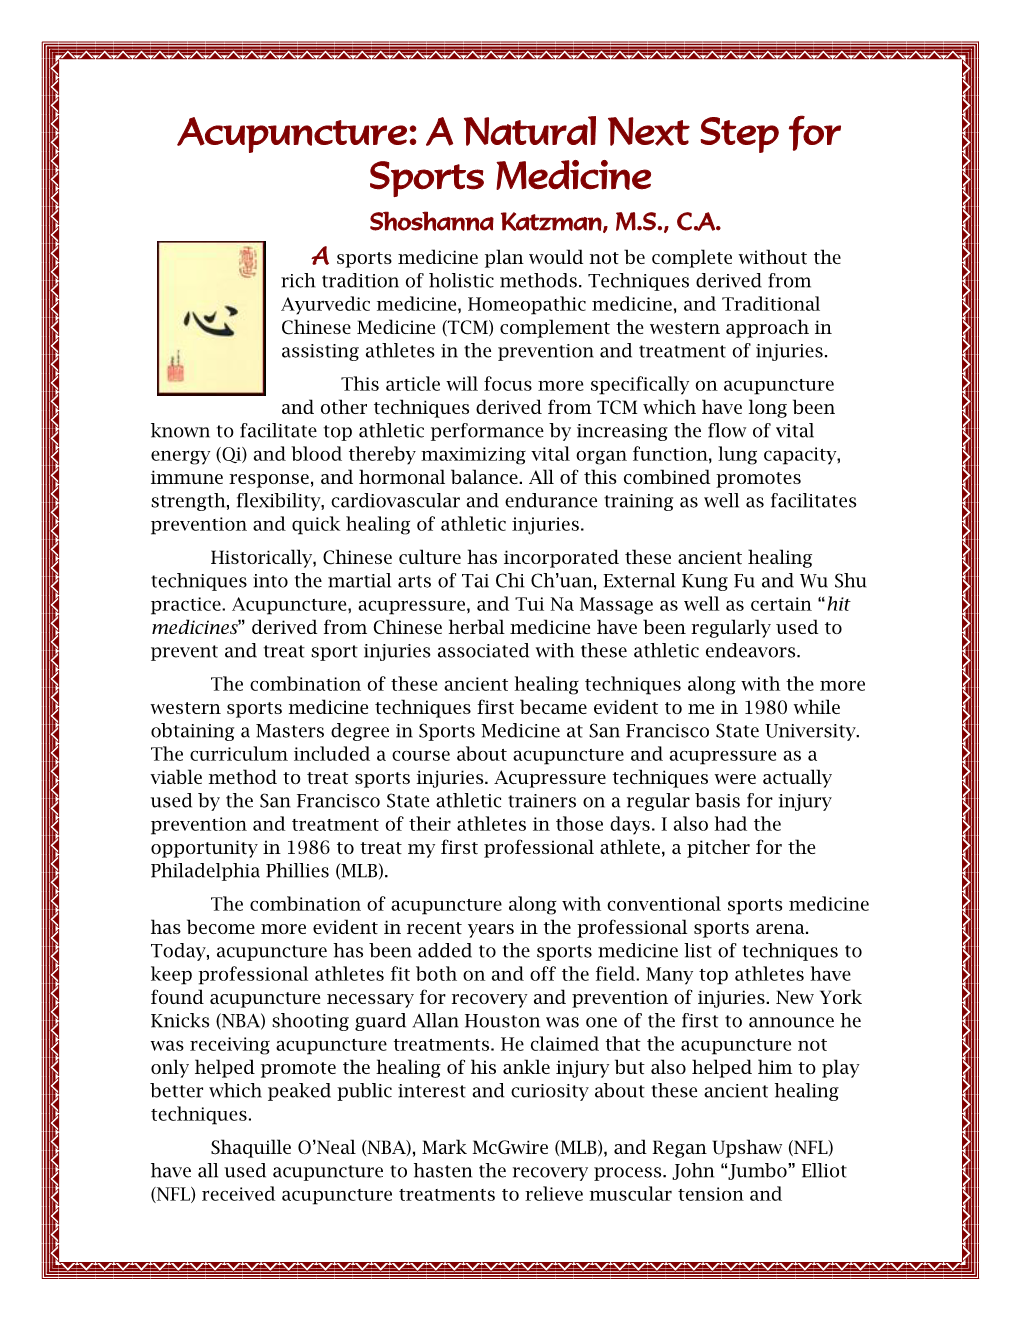 Athletes Today Are Looking Toward Complementary Medicine To